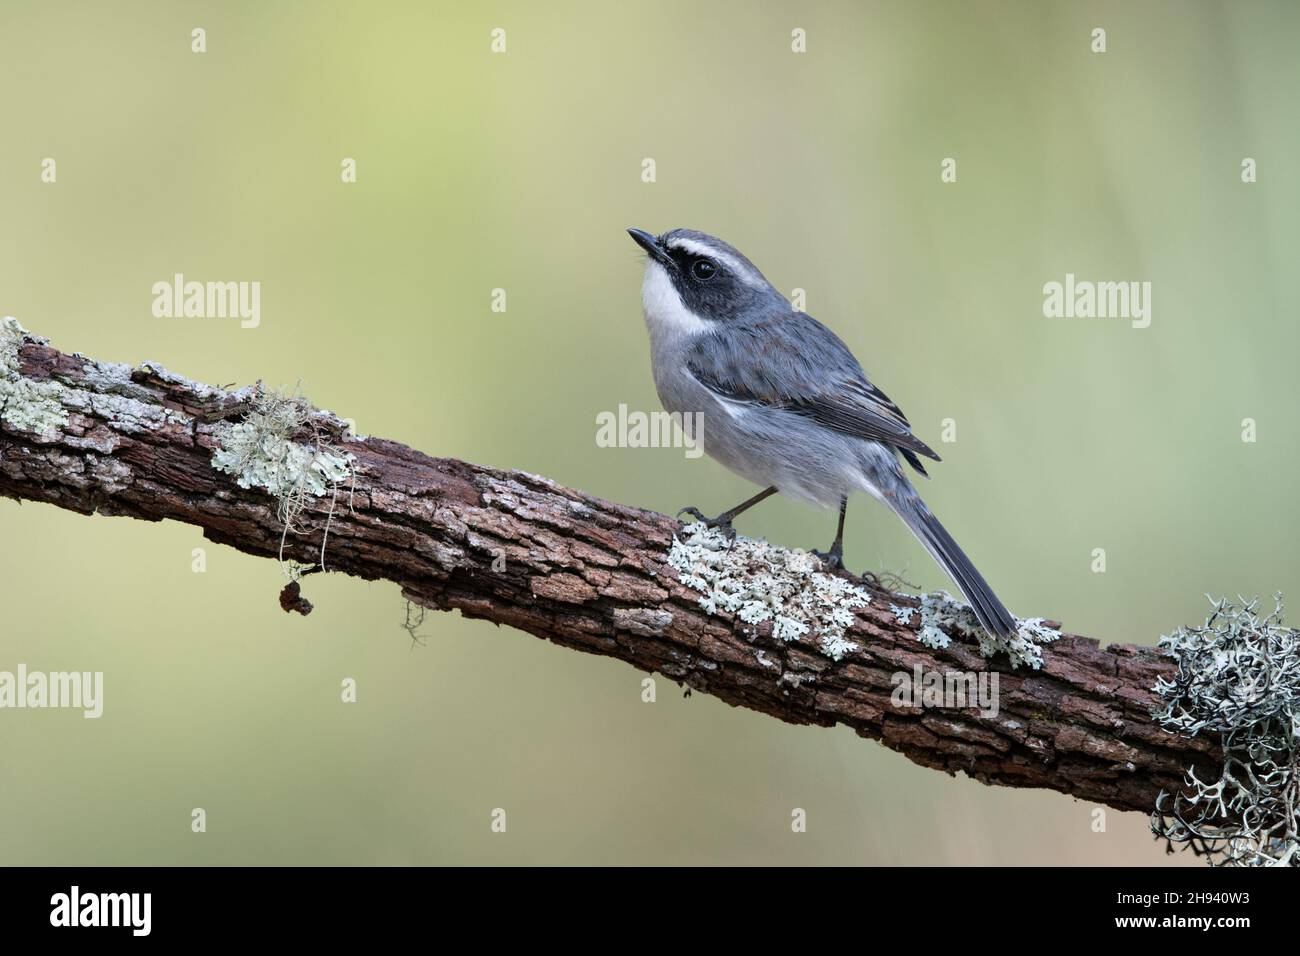 The grey bush chat (Saxicola ferreus) is a species of passerine bird in the family Muscicapidae. It is found in the Himalayas, southern China, Taiwan, Stock Photo